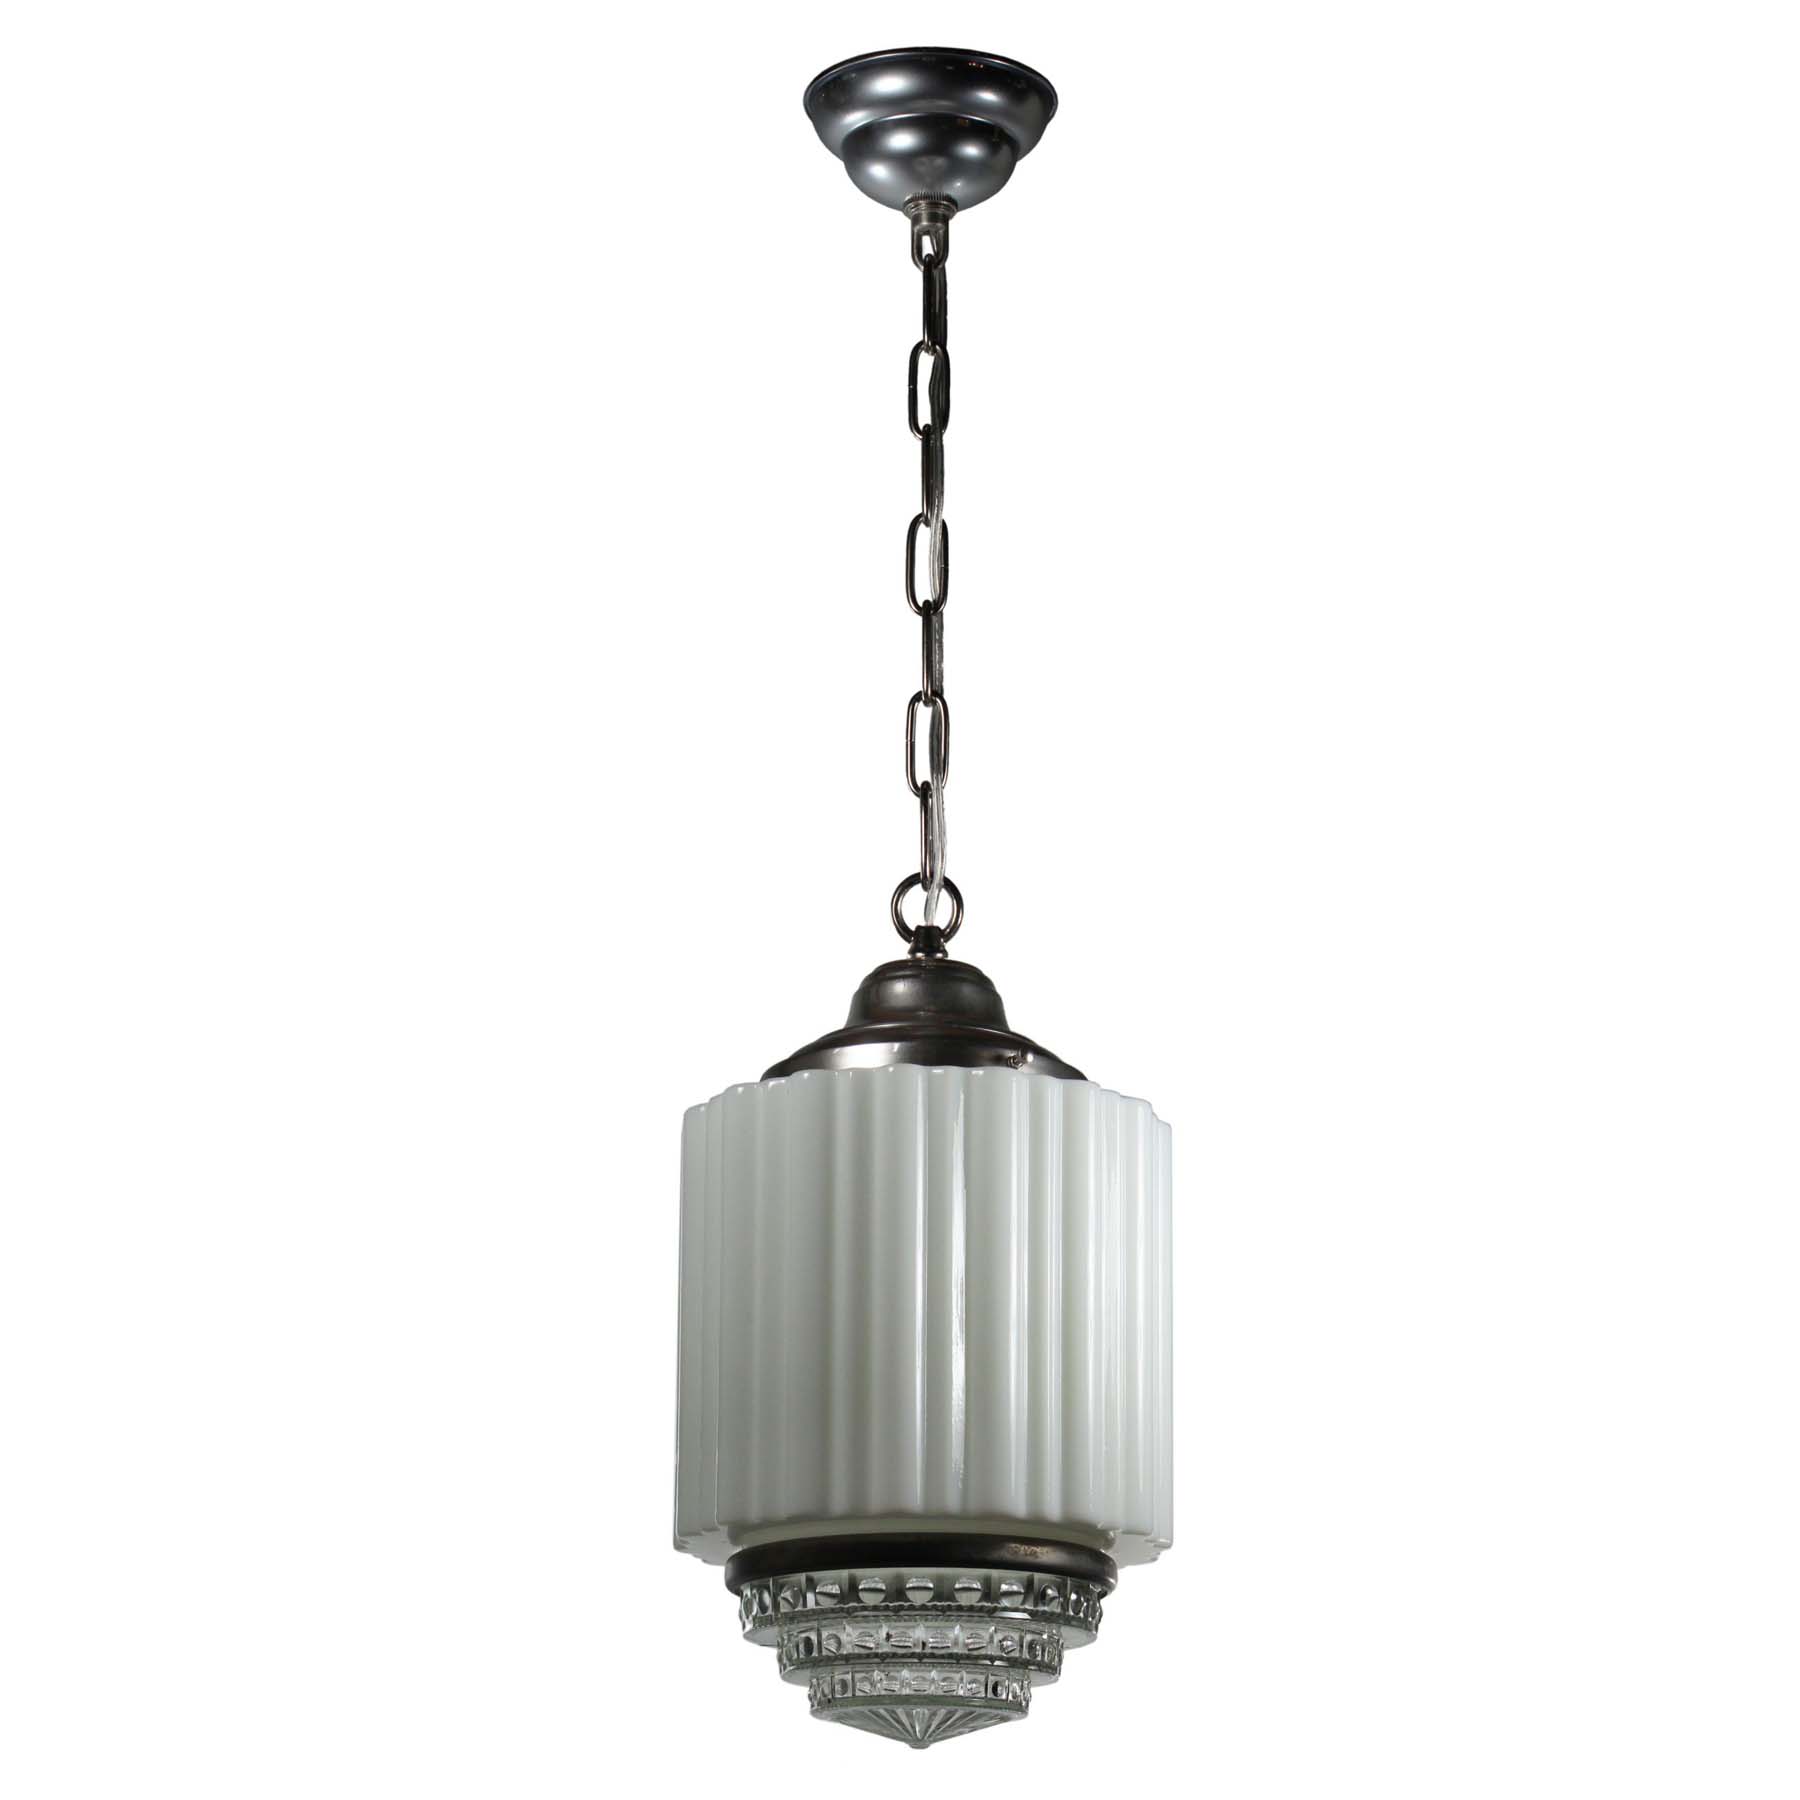 SOLD Art Deco Skyscraper Pendant with Two-Part Prismatic Shade, Antique Lighting-70556